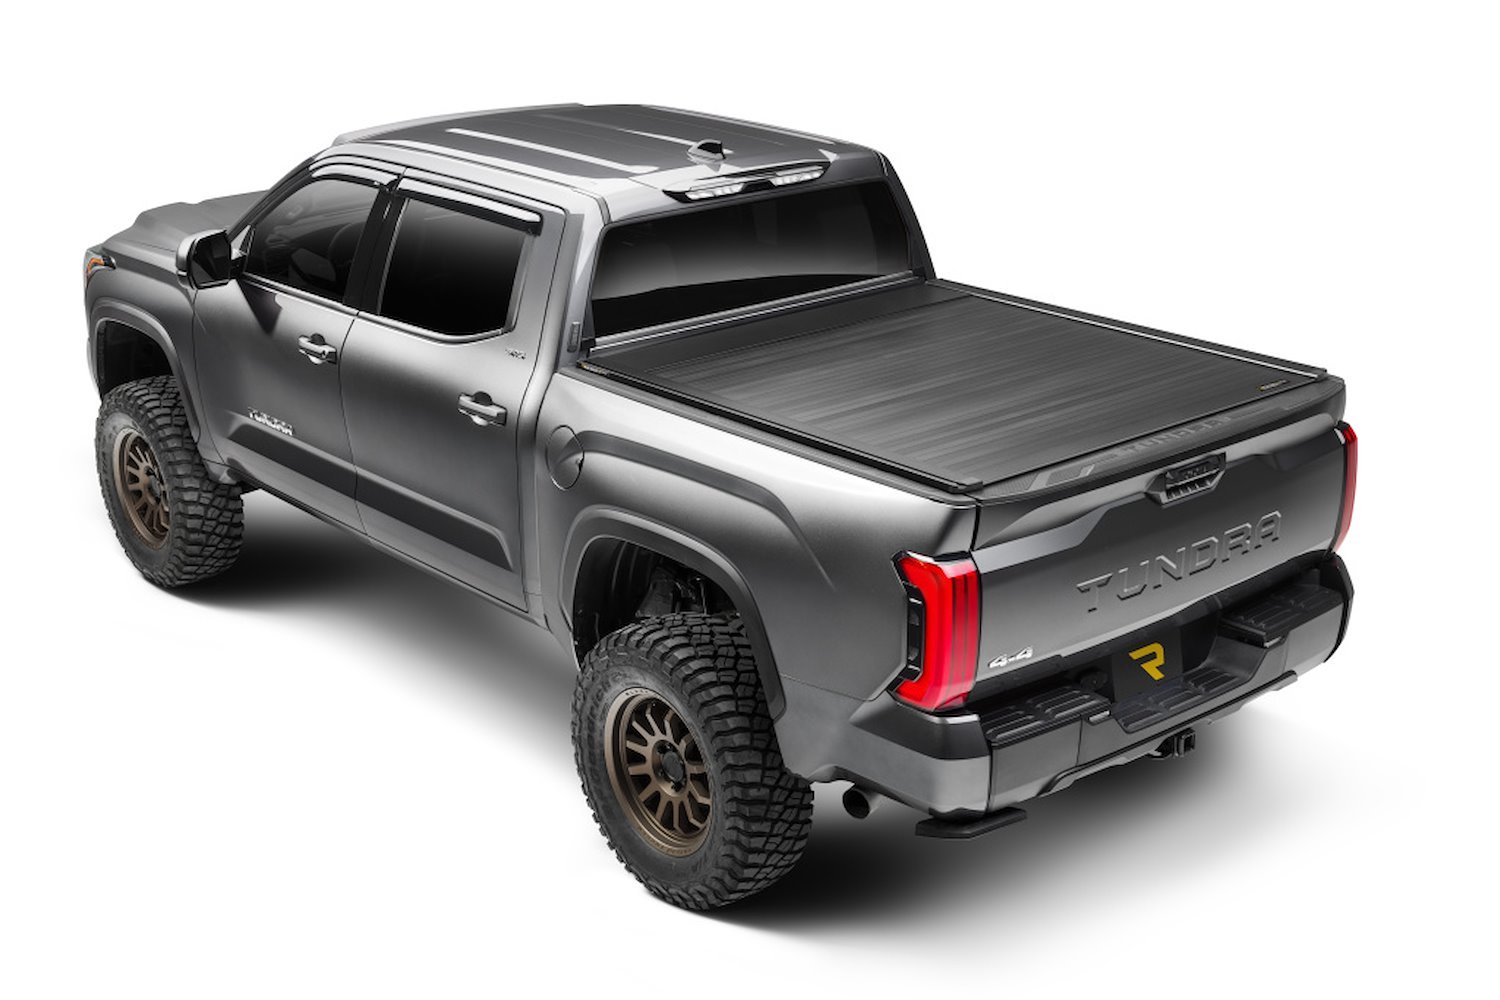 EQ0482 EQ Retractable Tonneau Cover 2019-2022 Chevy Silverado/GMC Sierra 1500 6' 7" Bed without Stake Pockets